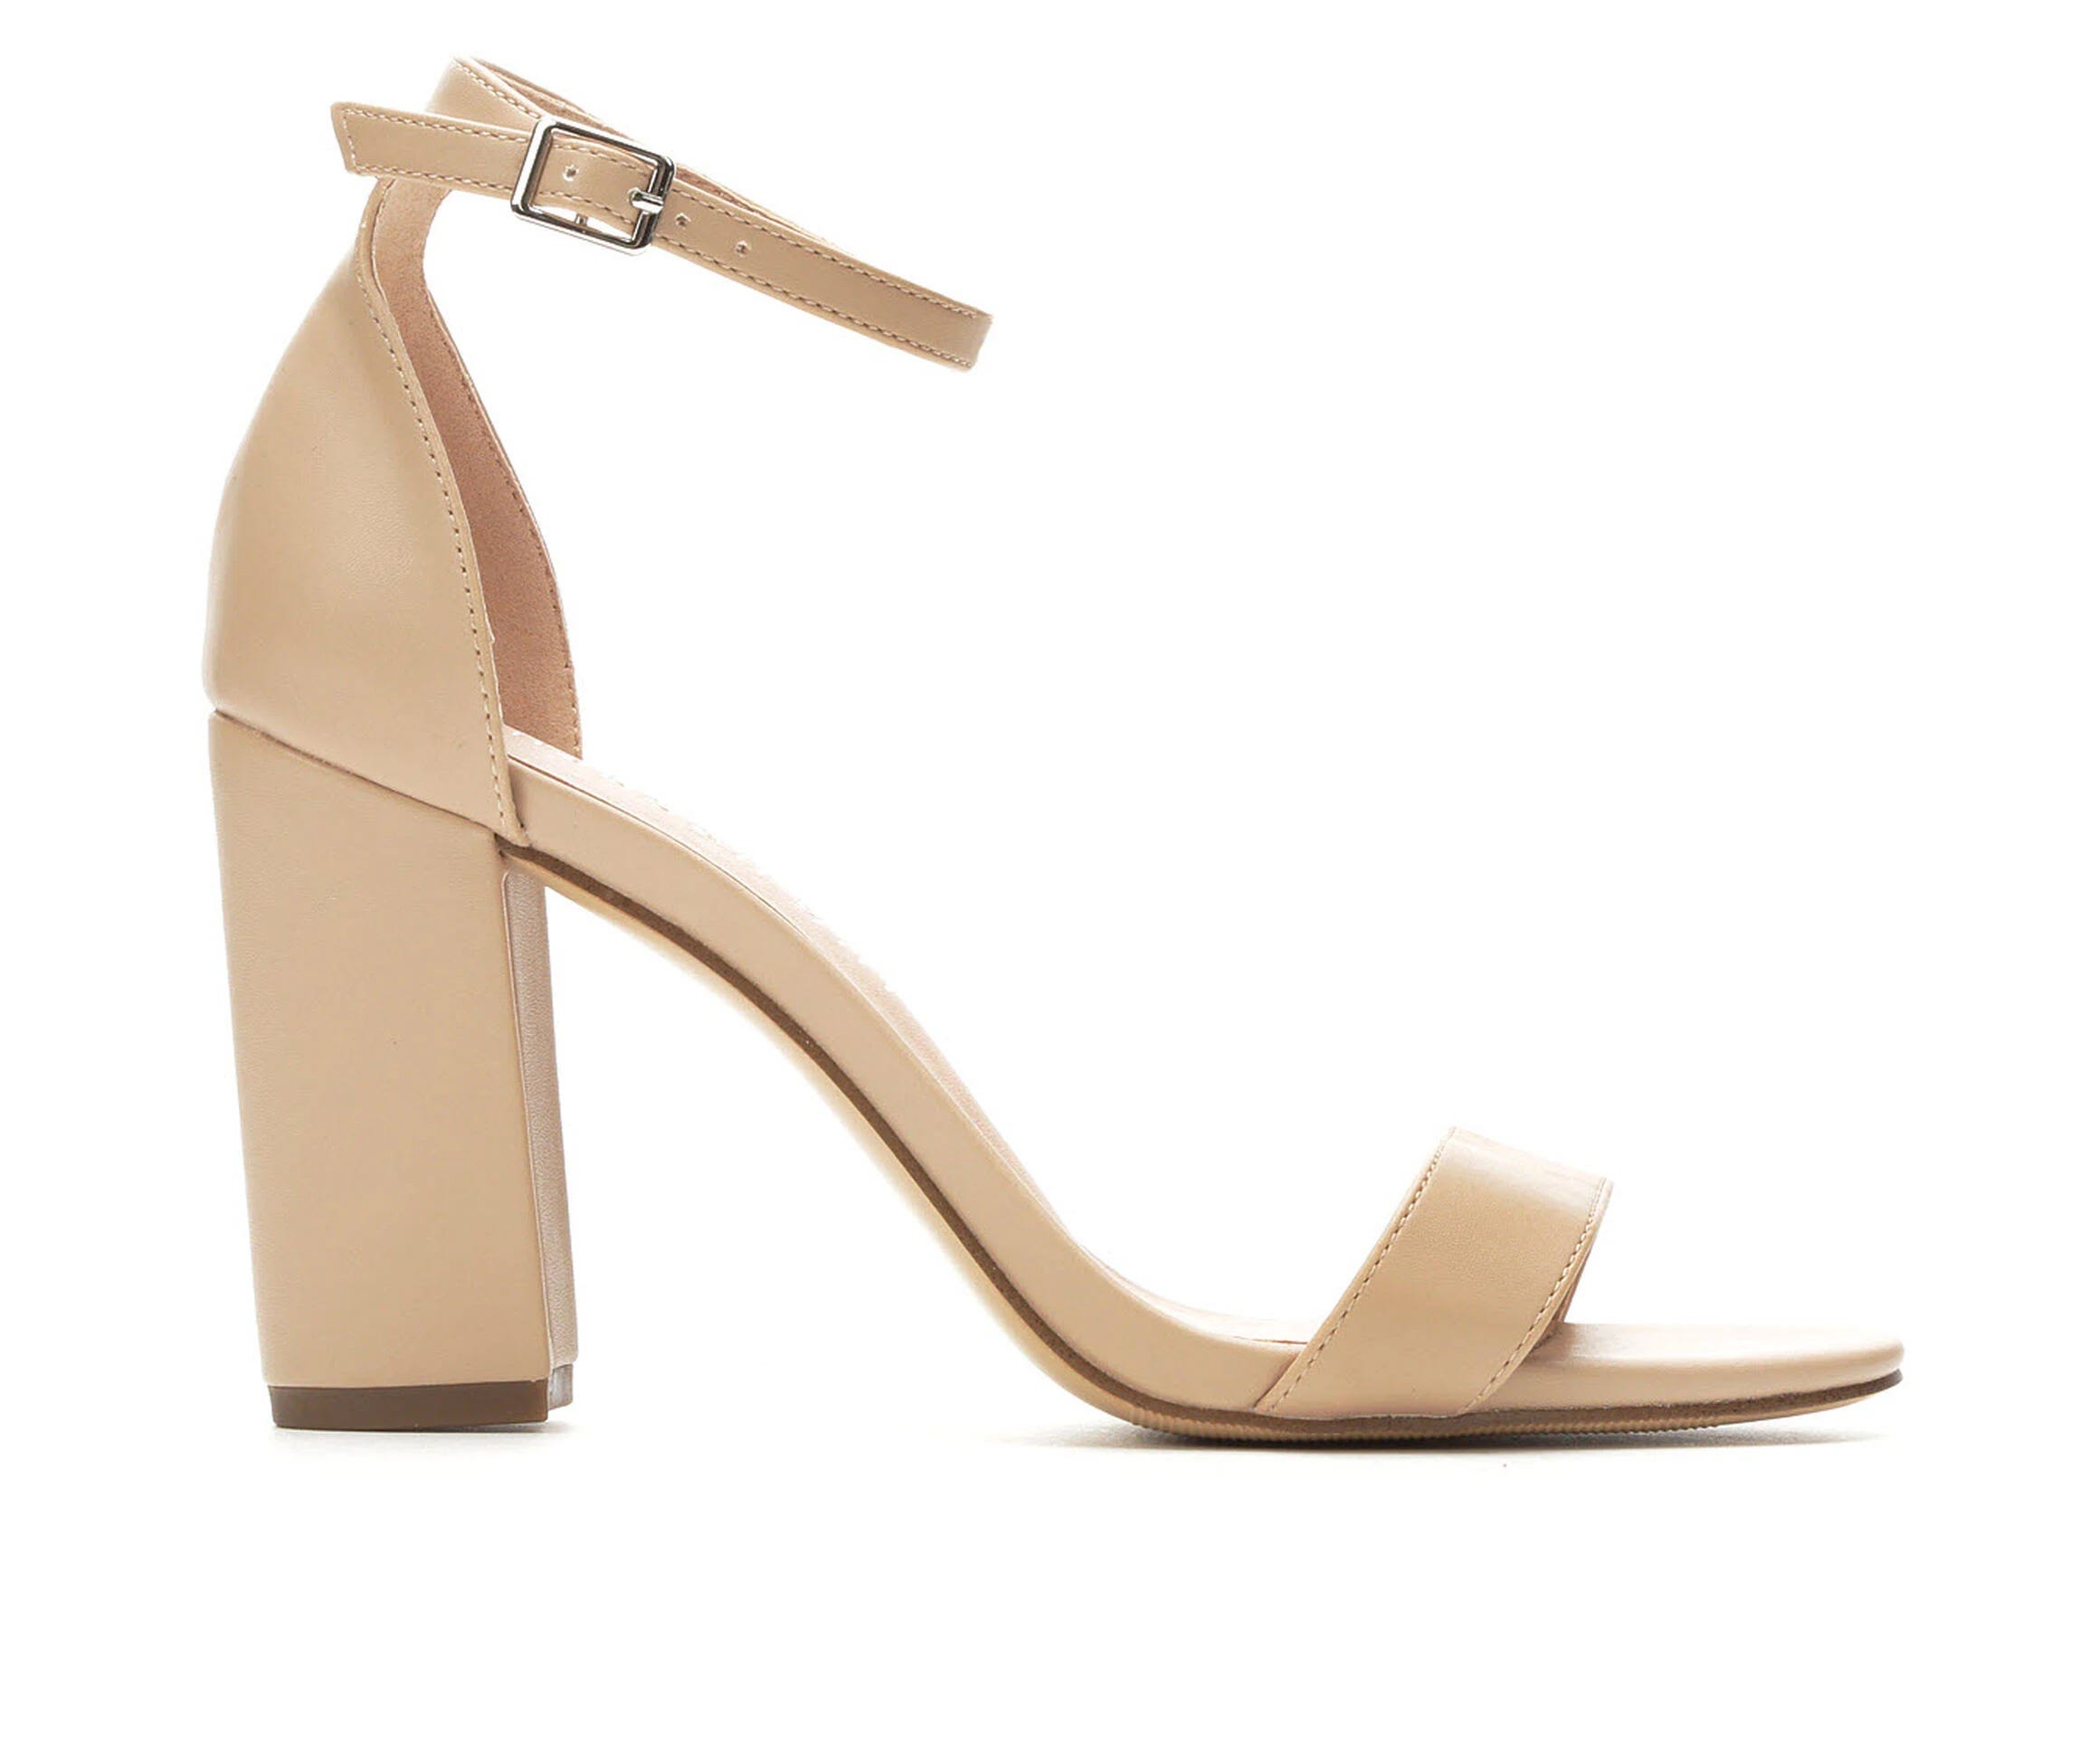 Strappy Nude Heeled Sandal with Faux-Leather Upper | Image